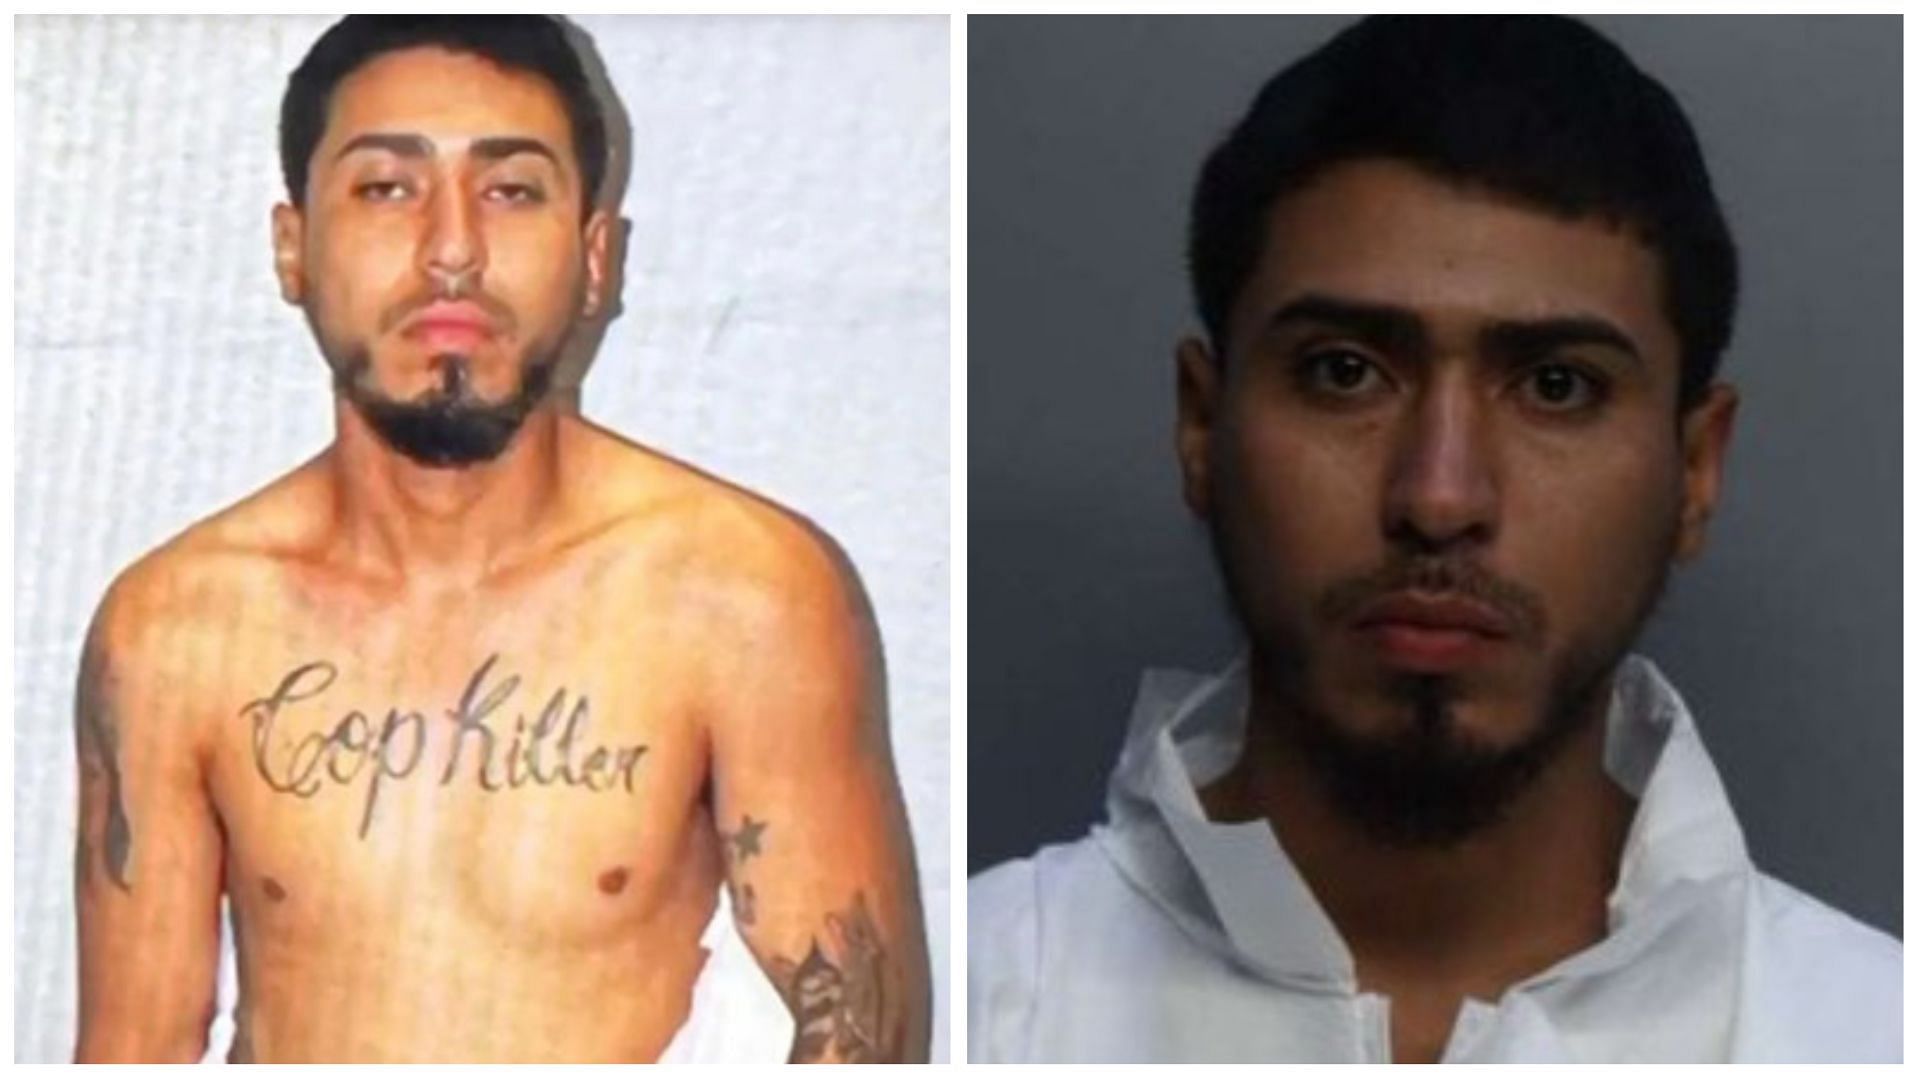 Virgilio Salgado opened fire at officer at an attempted traffic stop, (Images via Miami-Dade County Corrections)